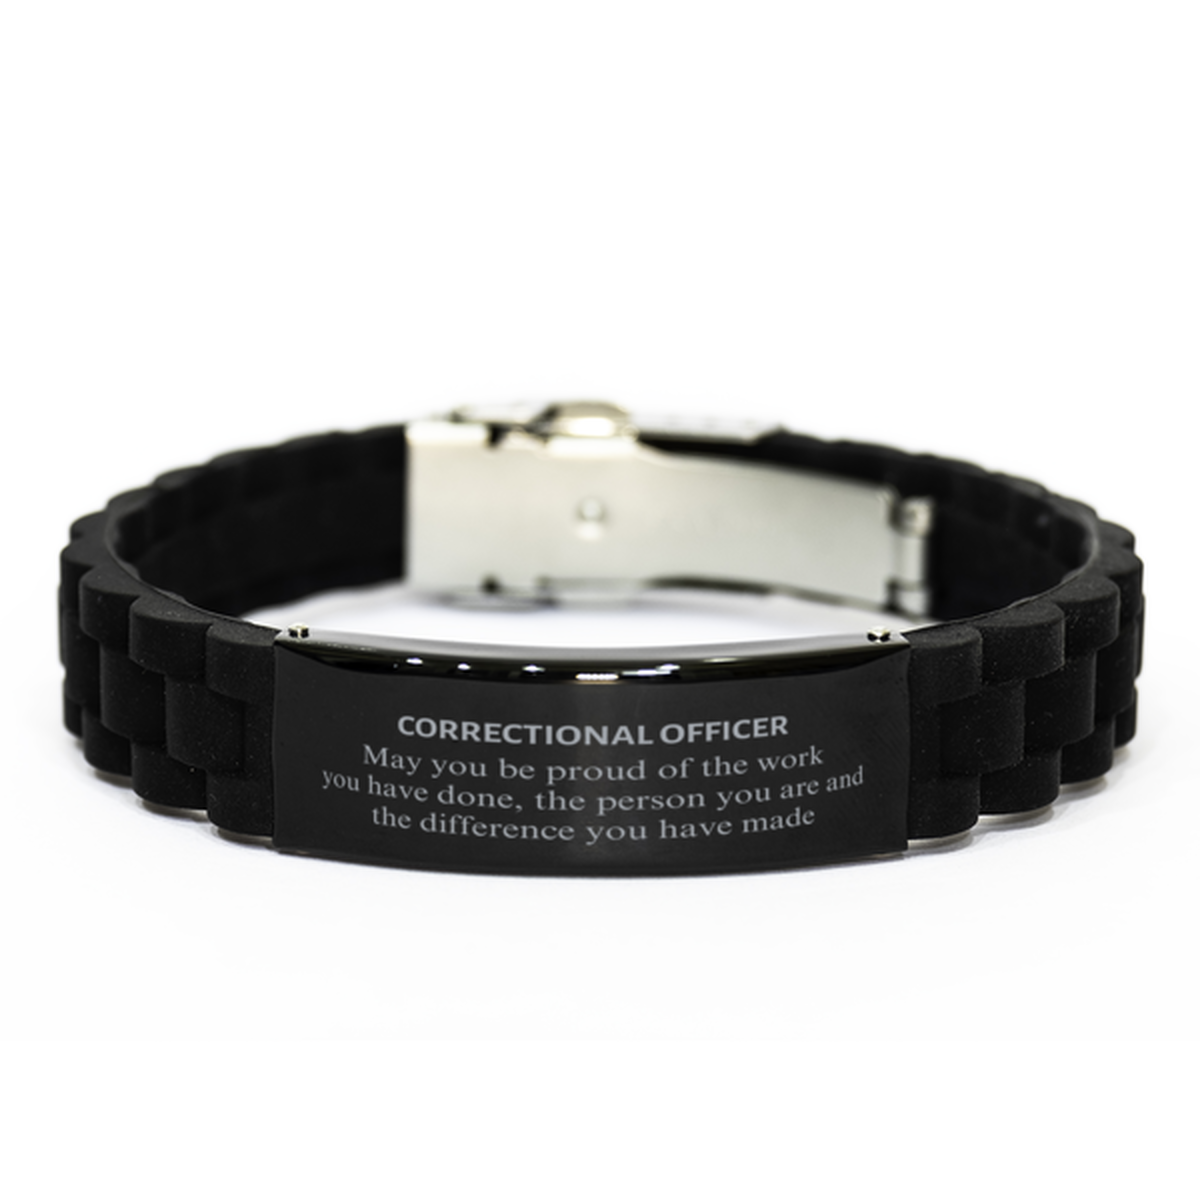 Correctional Officer May you be proud of the work you have done, Retirement Correctional Officer Black Glidelock Clasp Bracelet for Colleague Appreciation Gifts Amazing for Correctional Officer